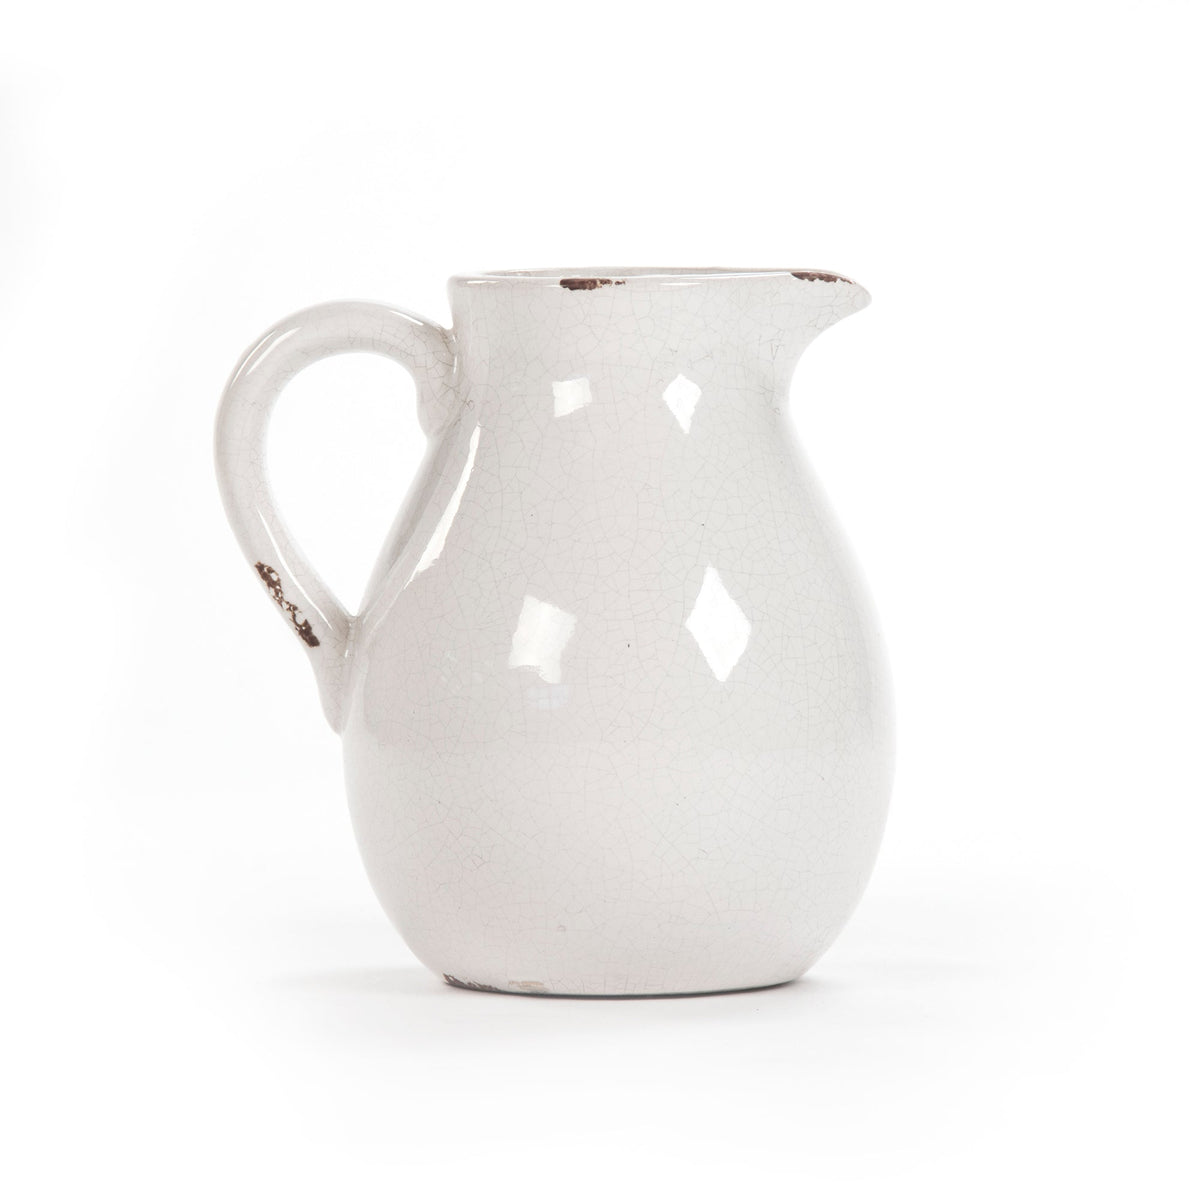 Distressed Crackle White Pitcher (6728L A369) by Zentique